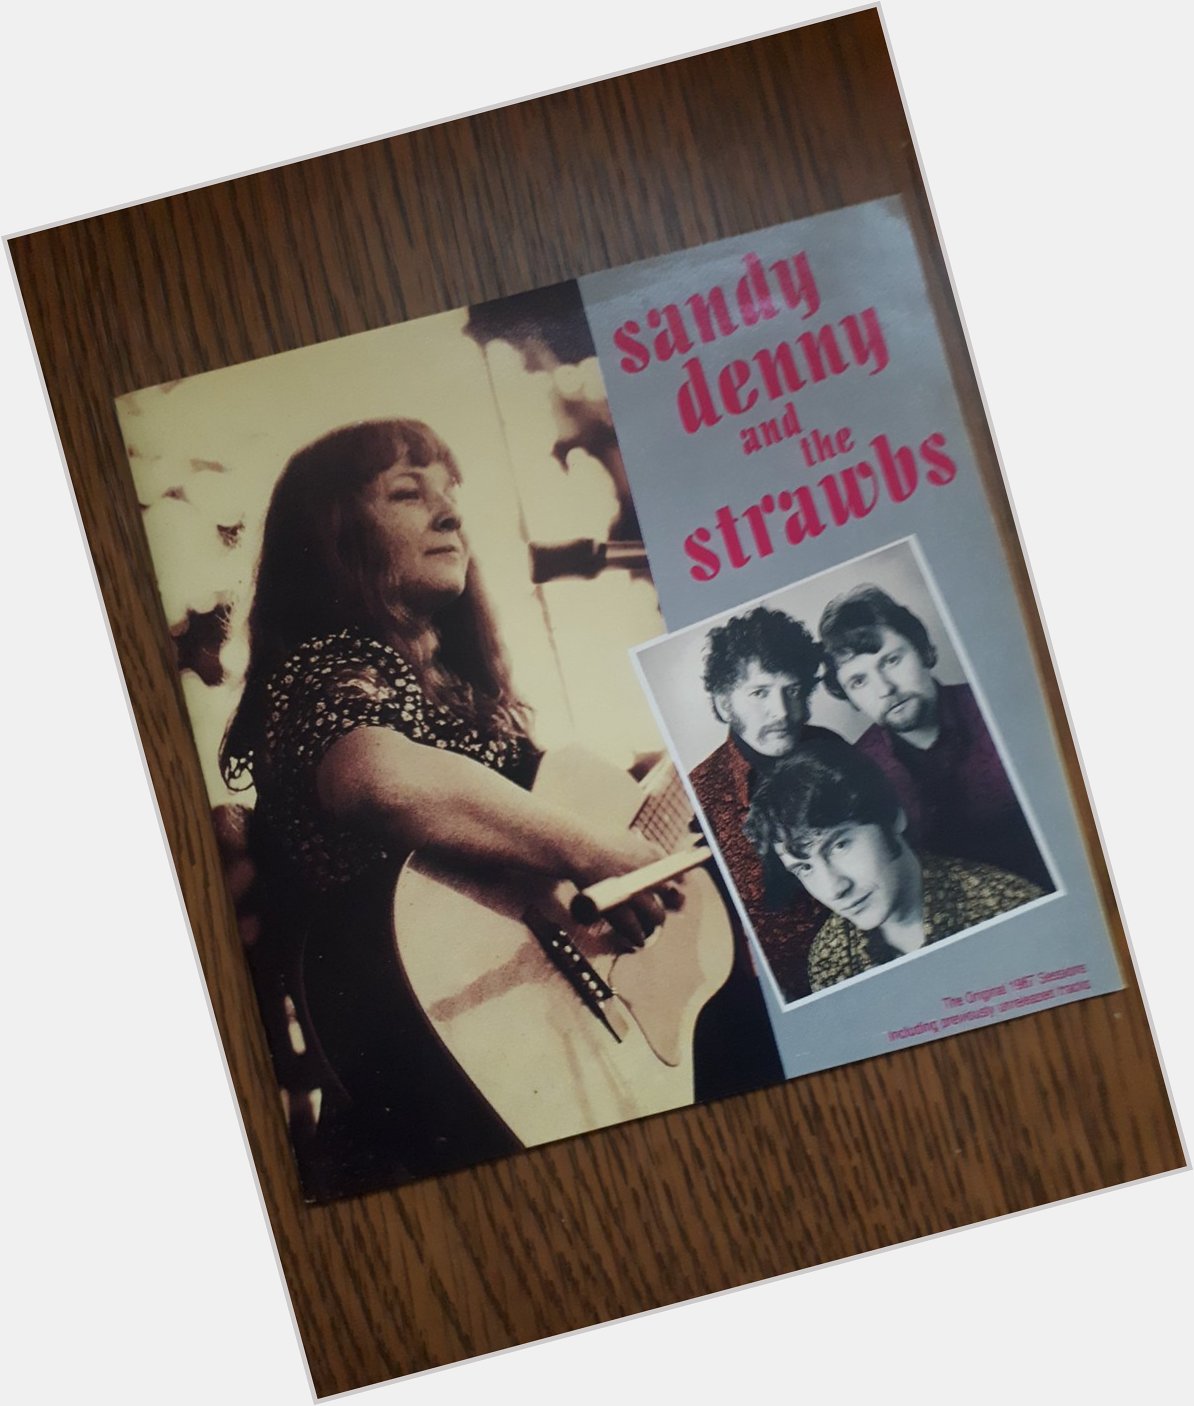   Happy Birthday Ann Wilson
... here\s a Gift for you two
Sandy Denny + The Strawbs 